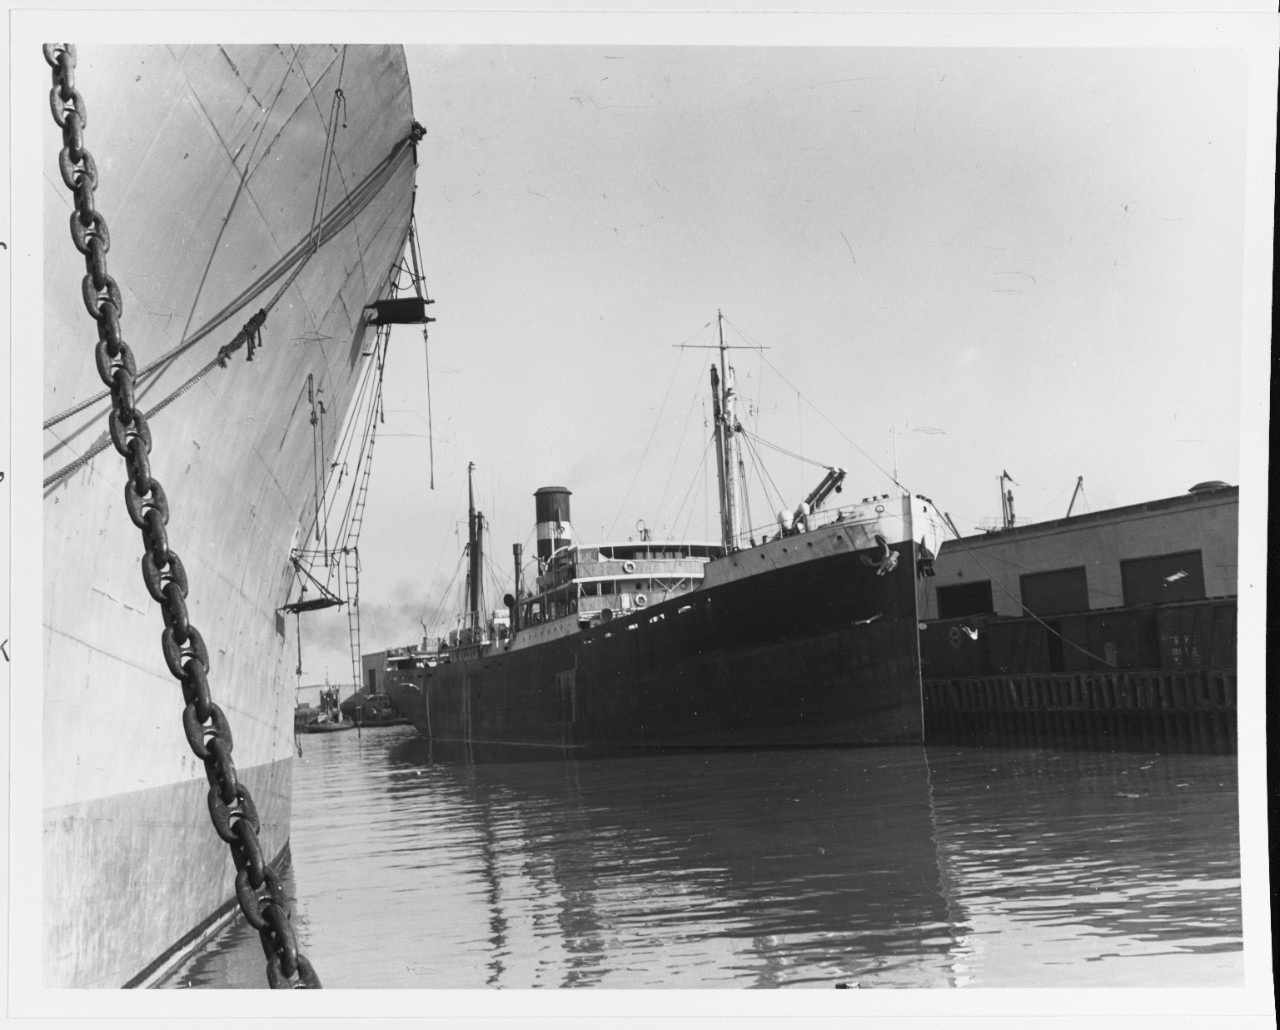 S.S. ANATOLY SEROV(USSR Merchant Freighter 1926-1949, under this name 1939-1949)                    